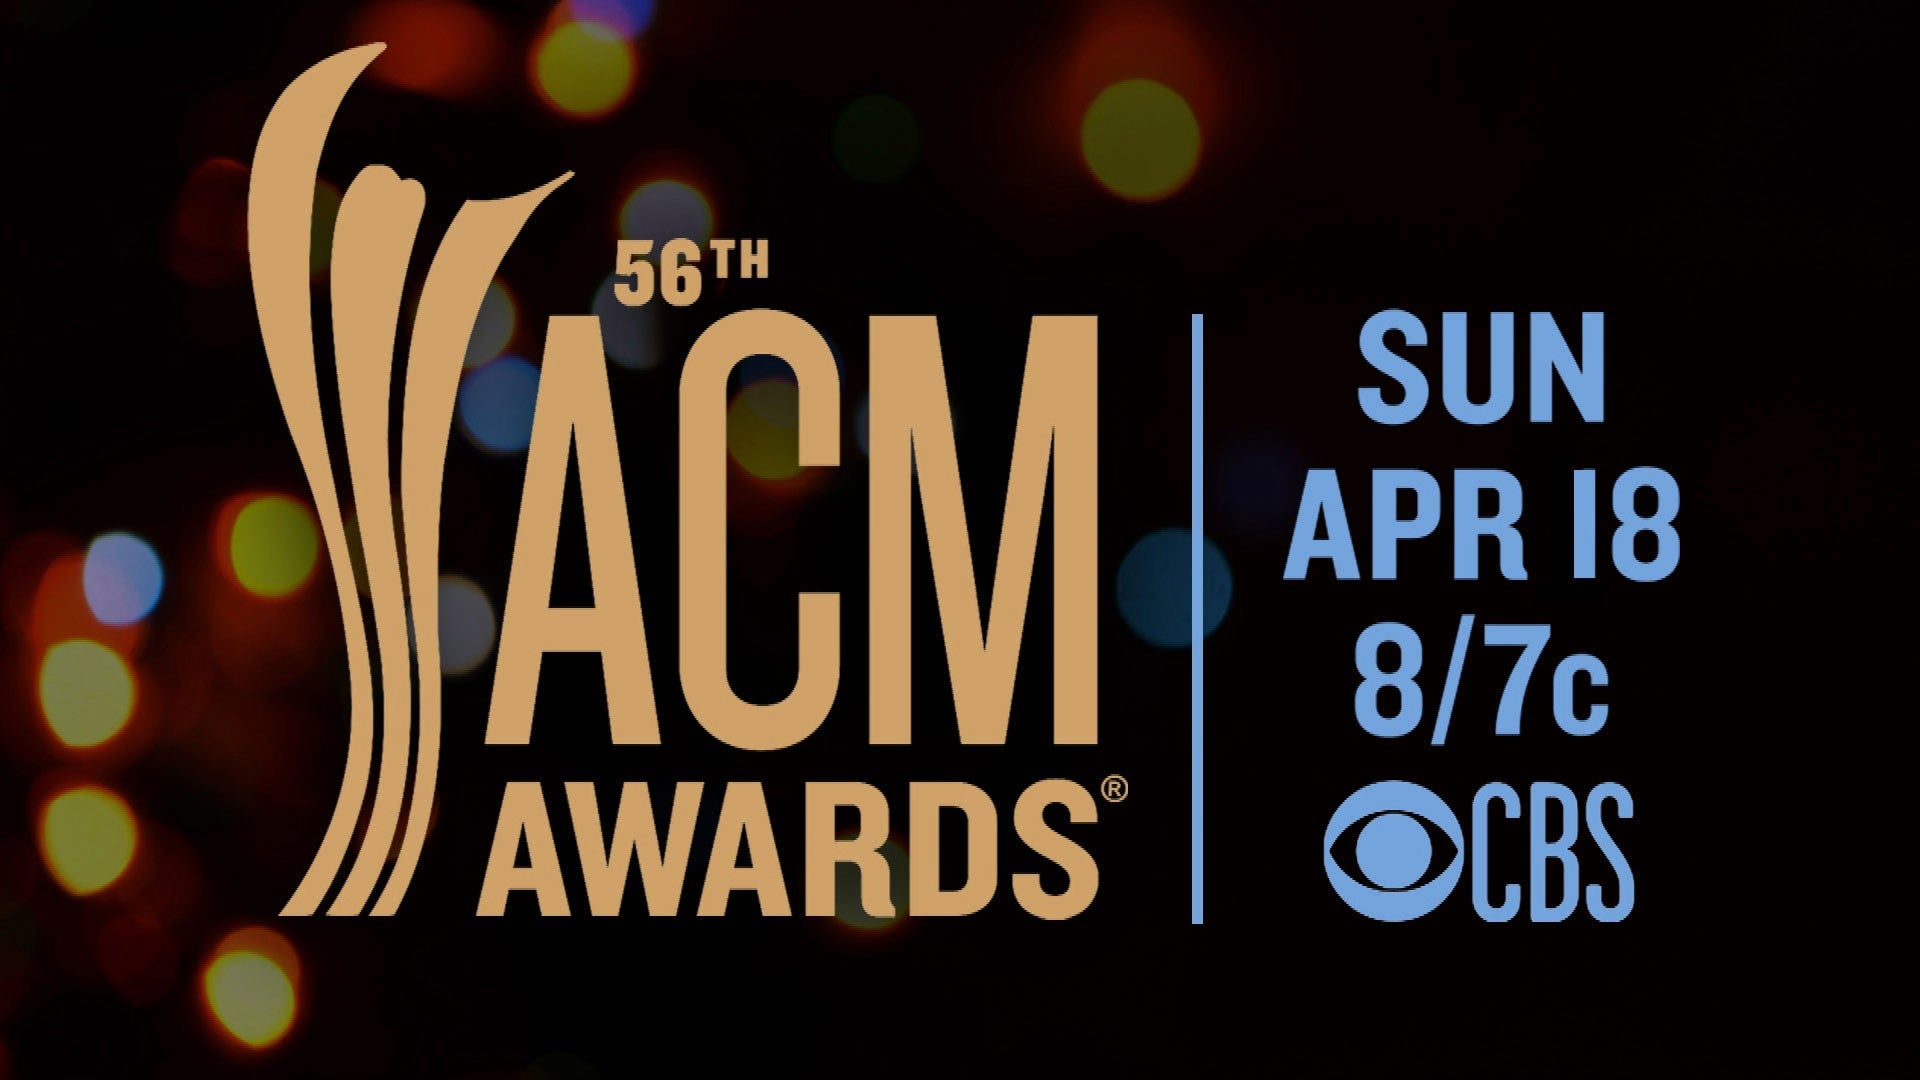 Acm Awards / 2021 Acm Awards Nominees The Full List Find out whether